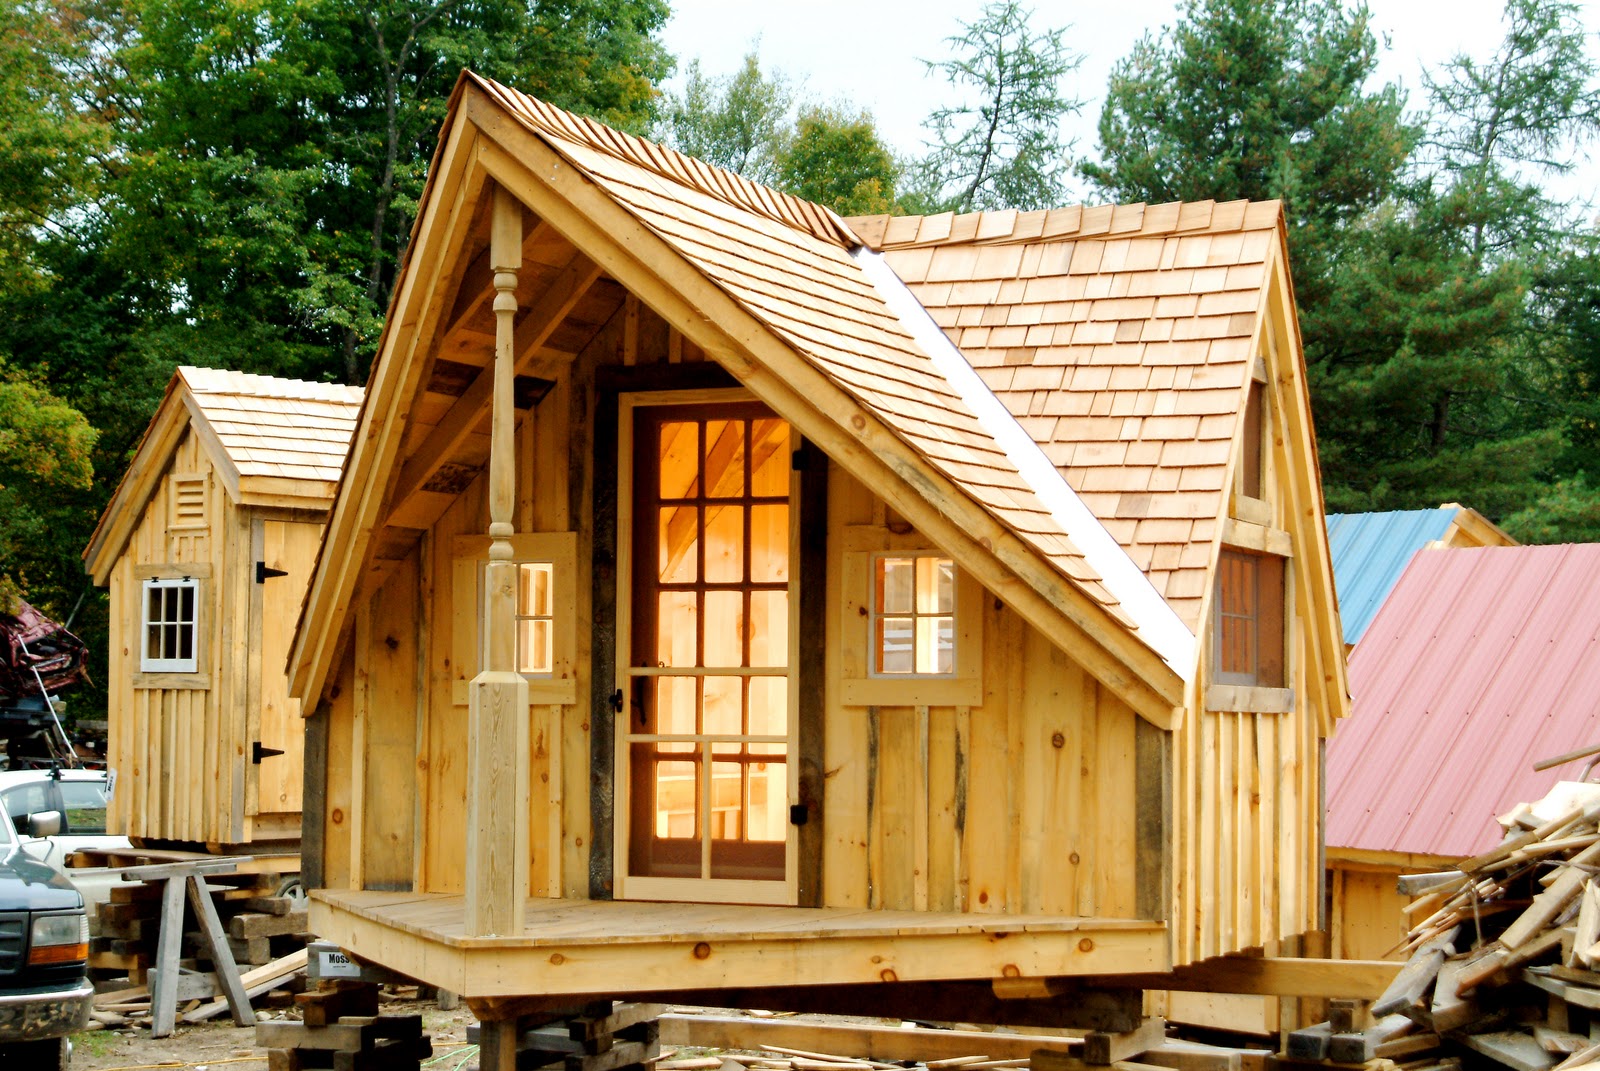 Firewood Wood Shed Plans also Small Cabins Tiny Houses Plans also 